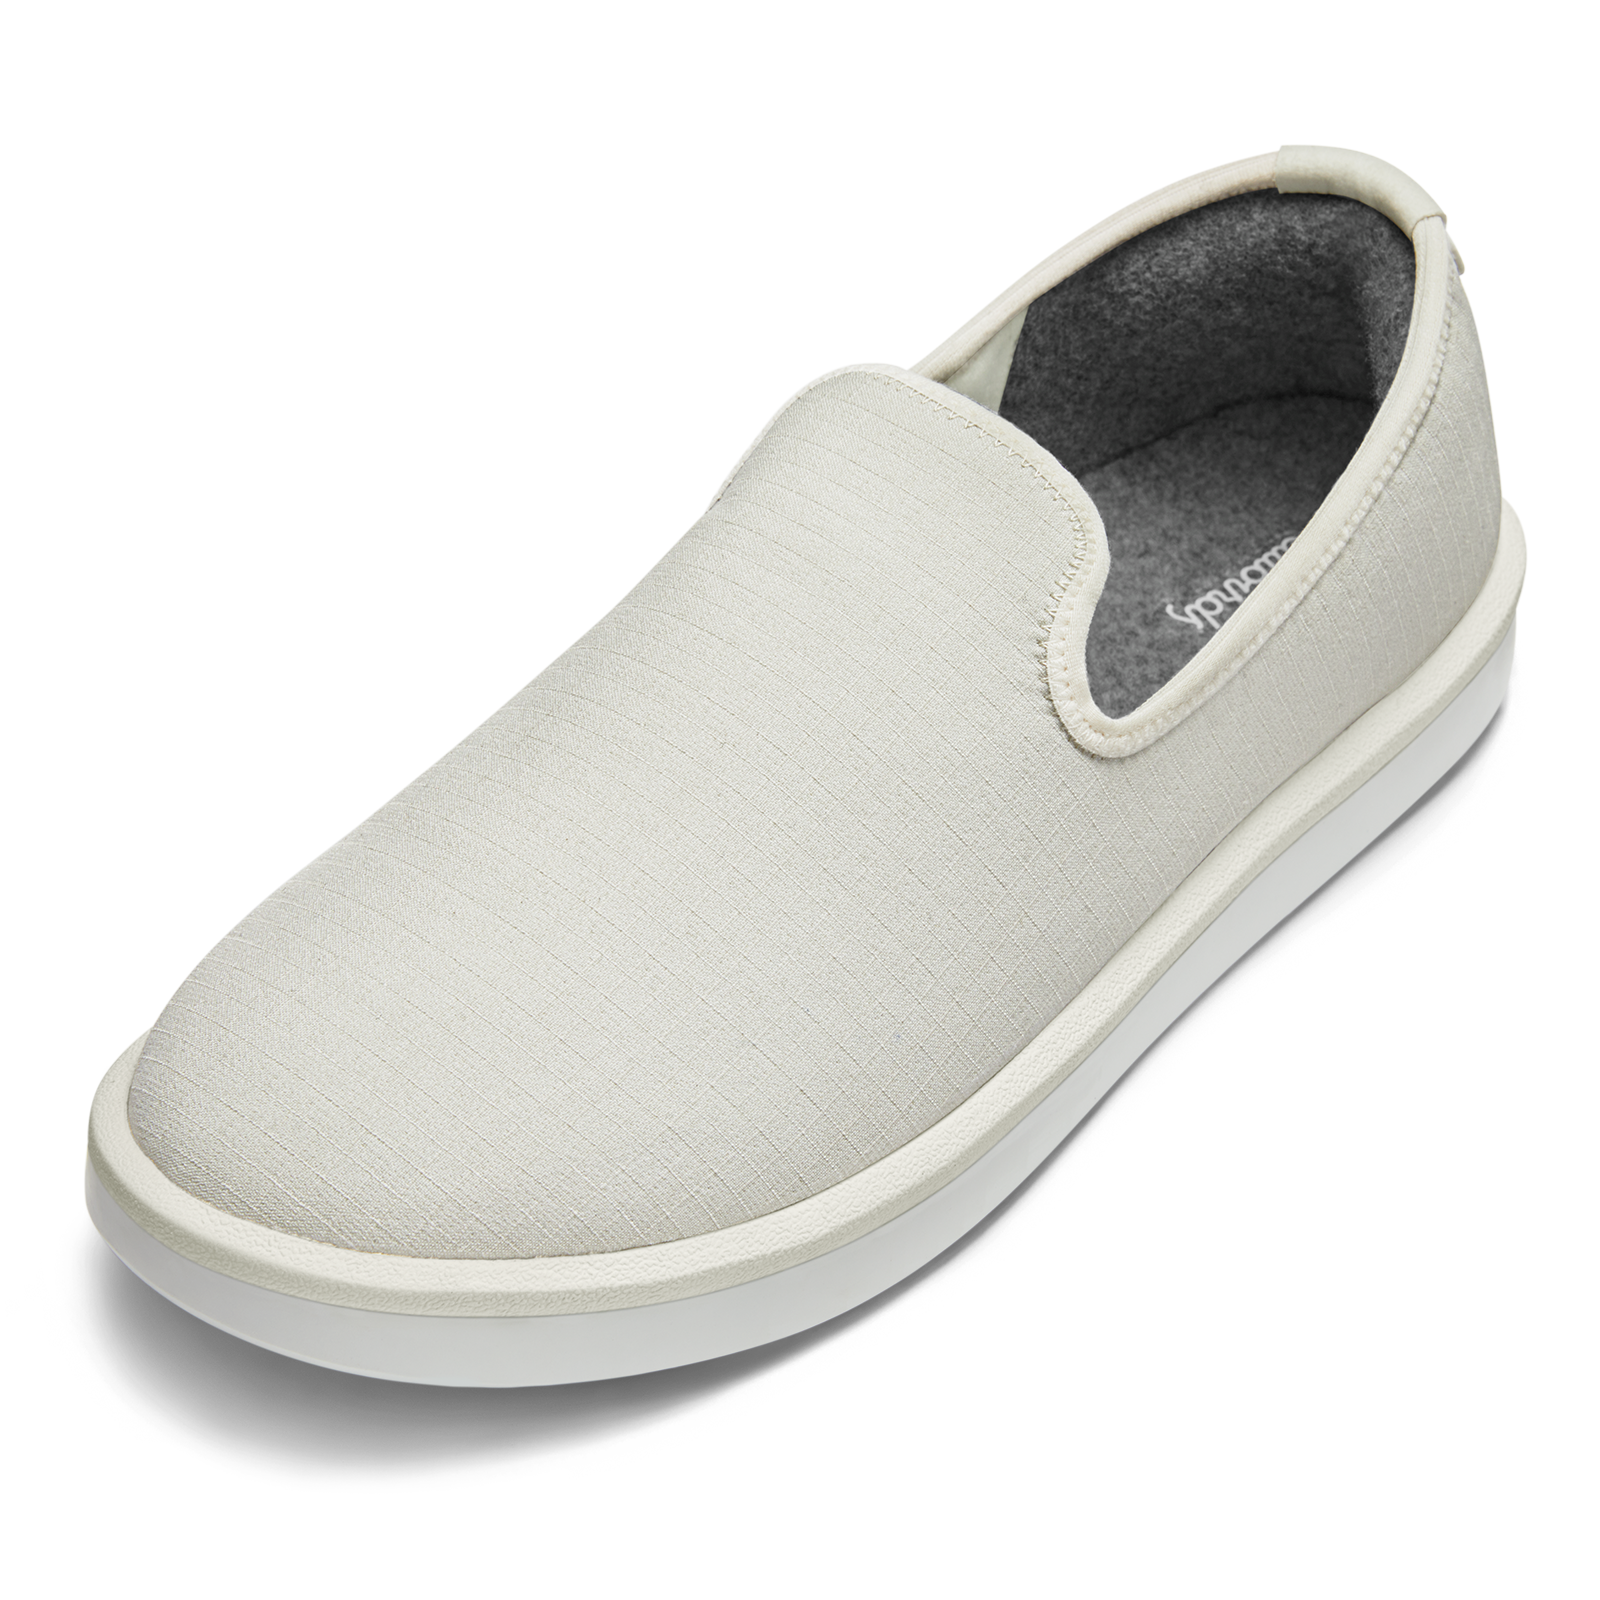 Men's Wool Lounger Woven - Natural White (Blizzard Sole)